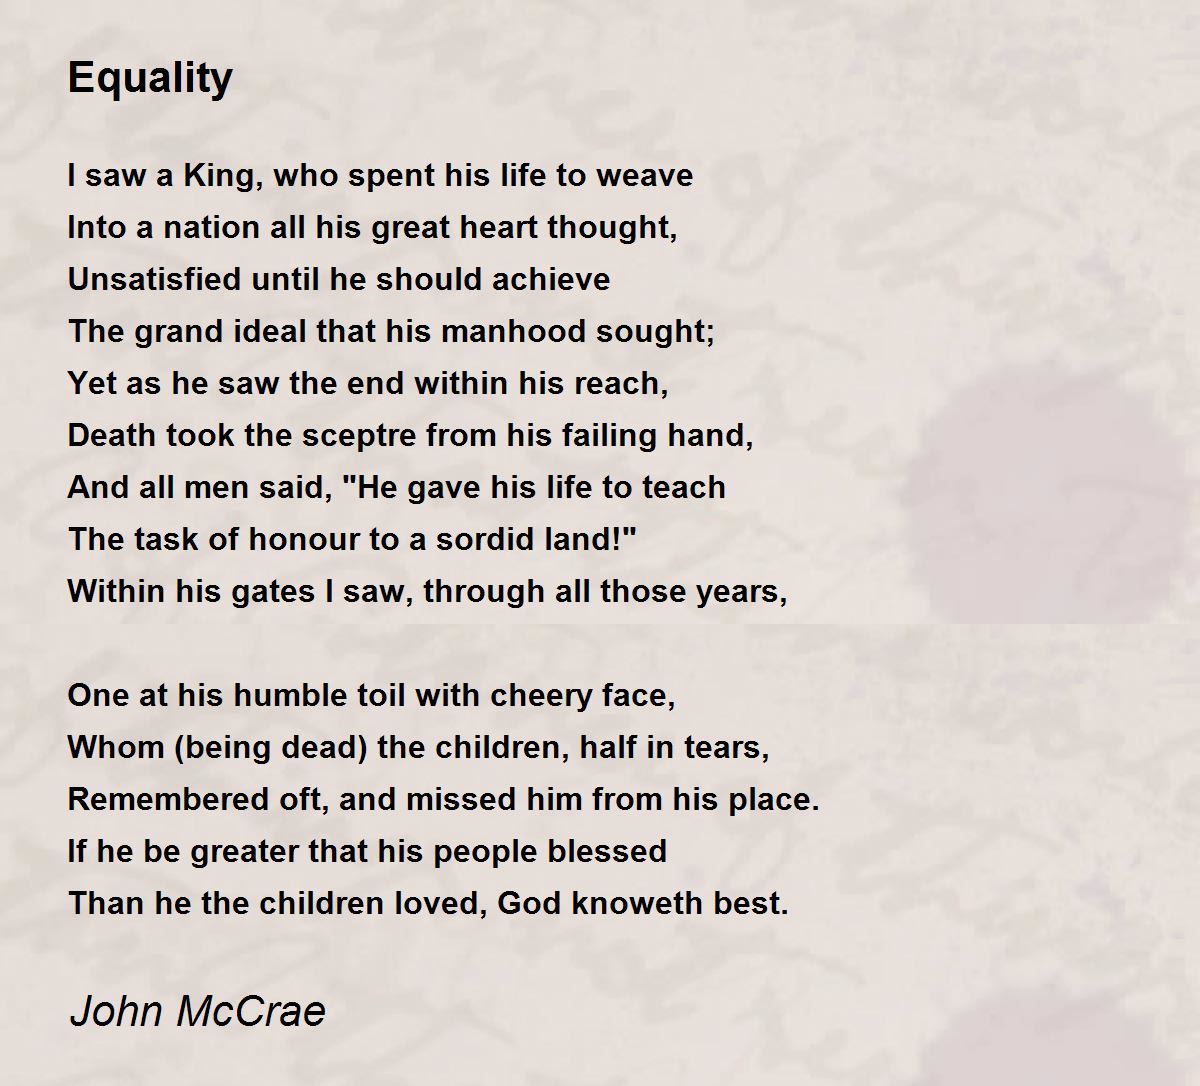 critical essay about poem equality